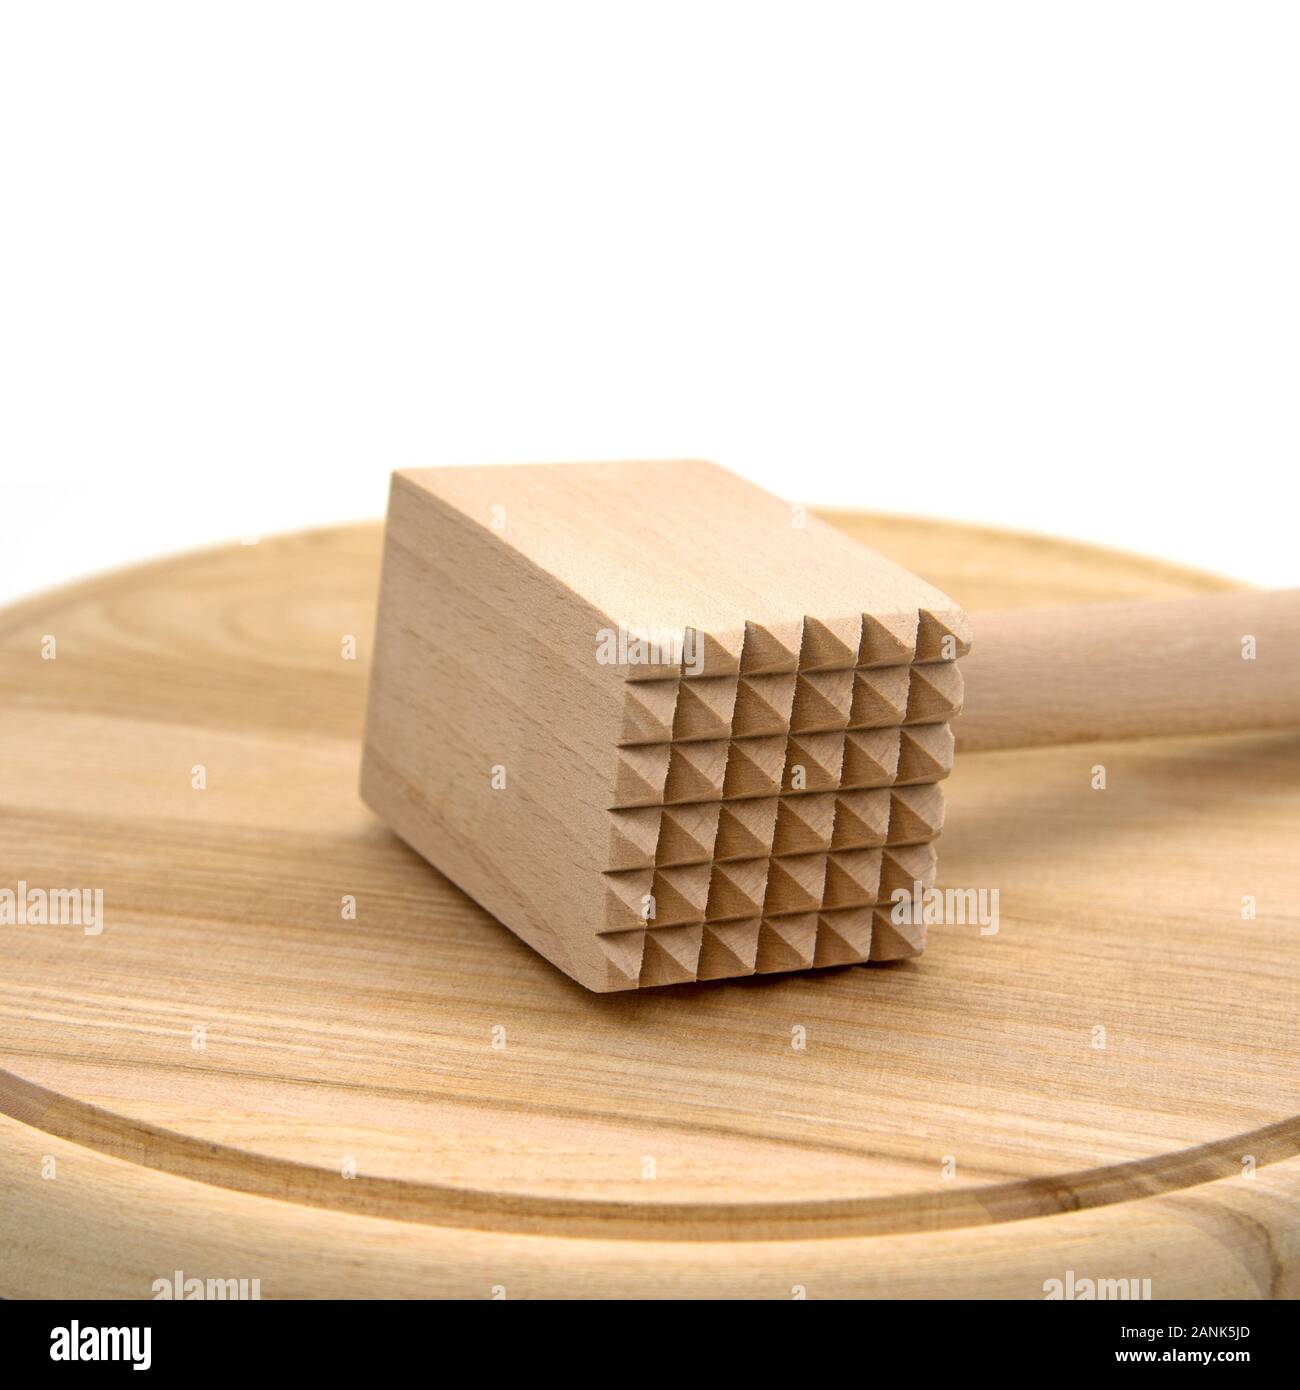 Meat tenderizer made of wood Stock Photo